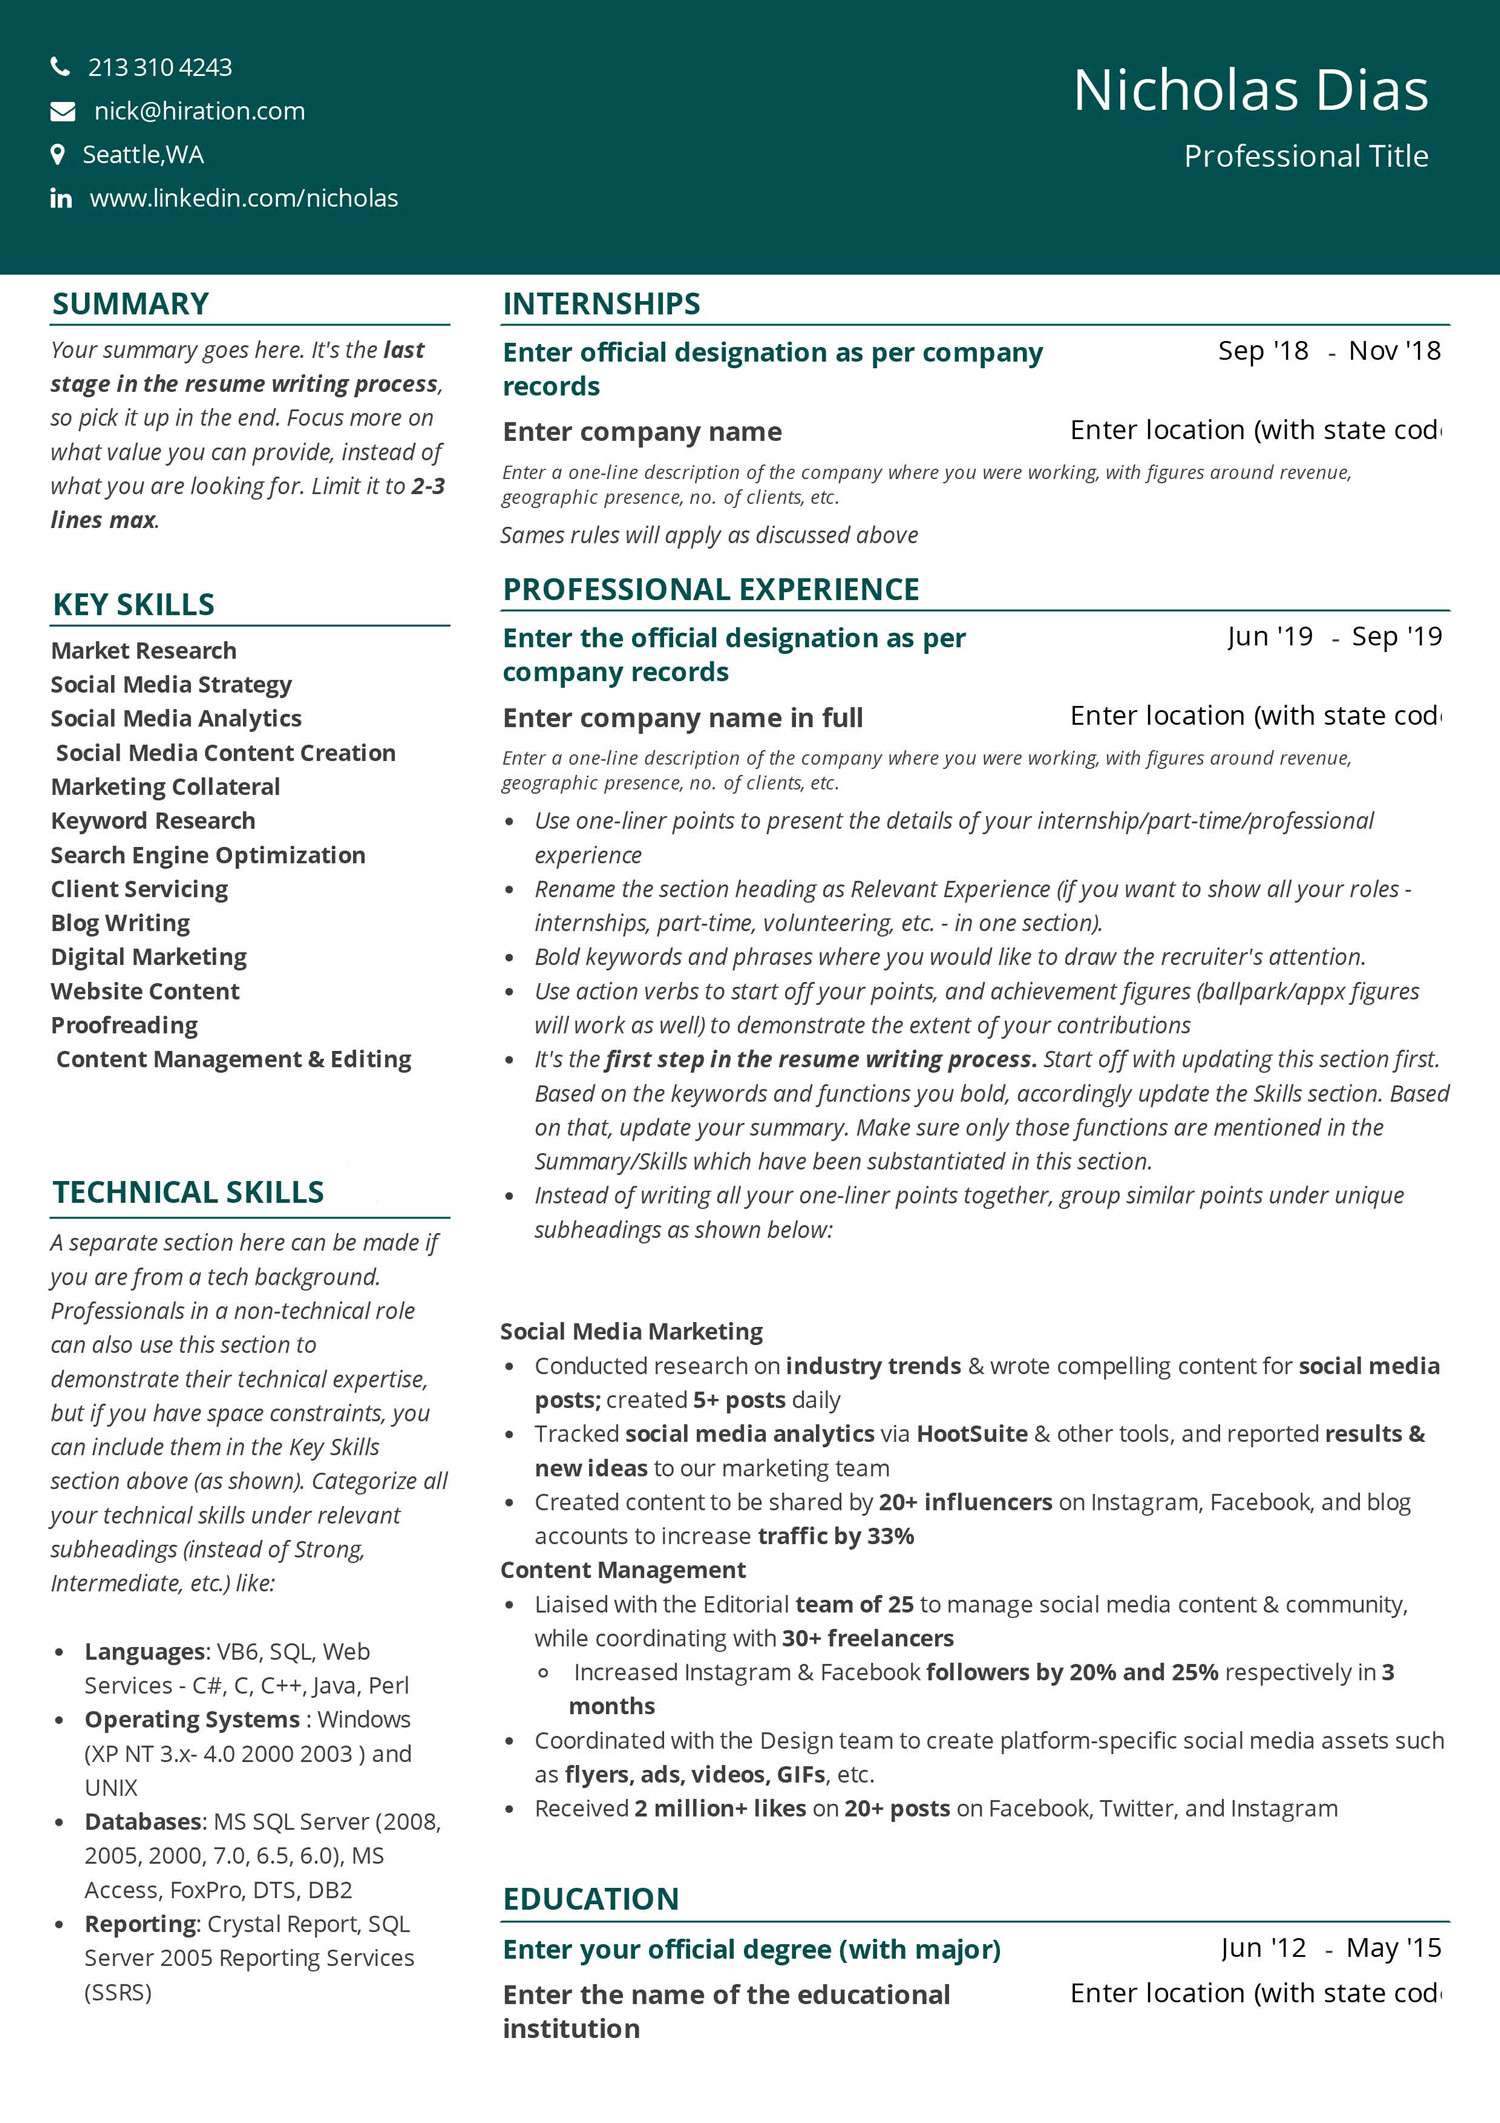 Resume Sample for Color Guard Instructor Best Free Resume Templates with Examples [2020]